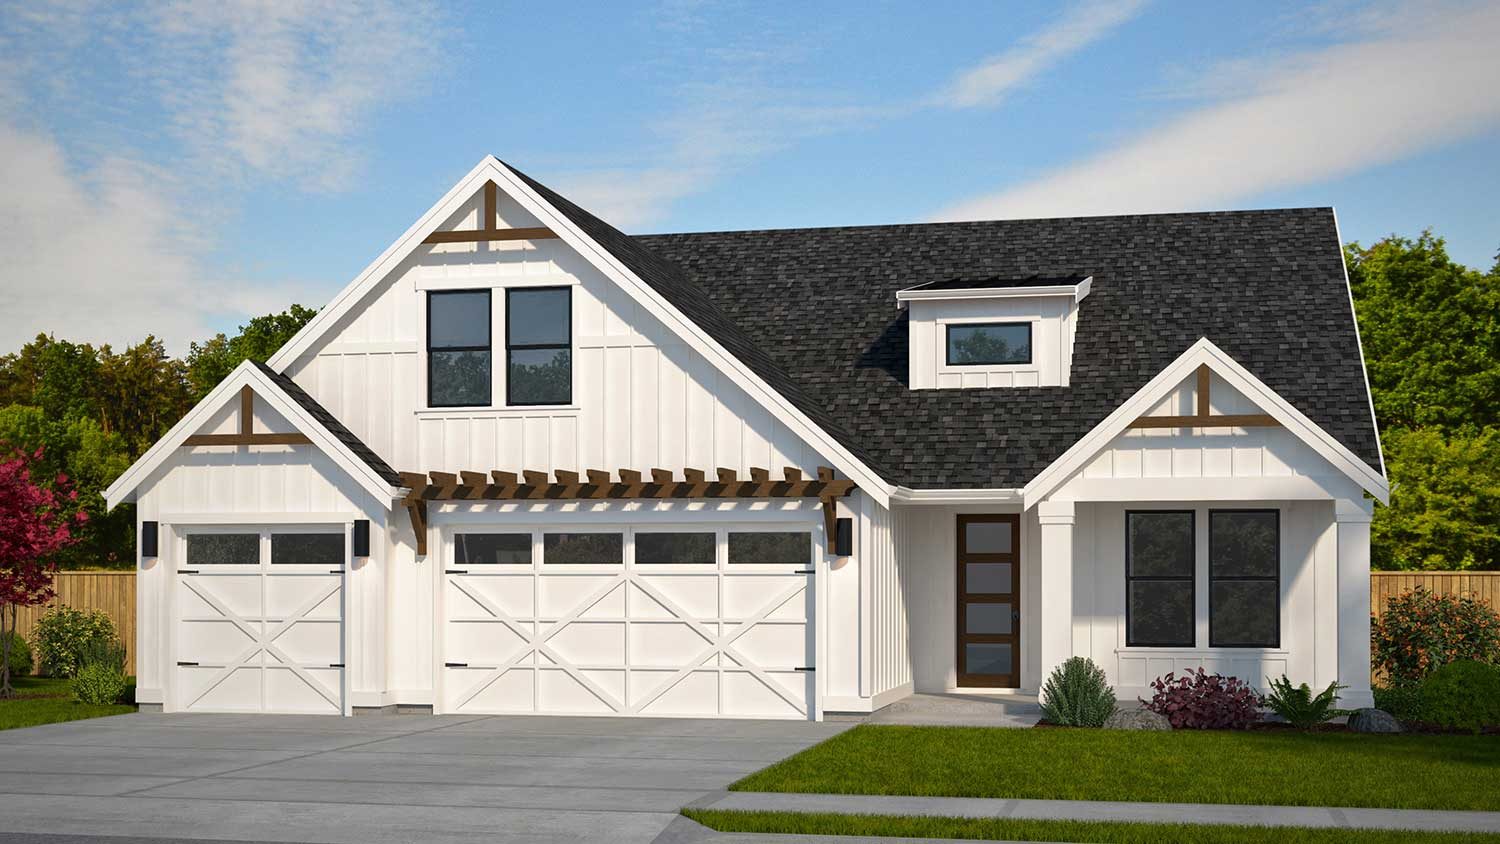 Rendering of the Cypress Farmhouse elevation by Kingston Homes